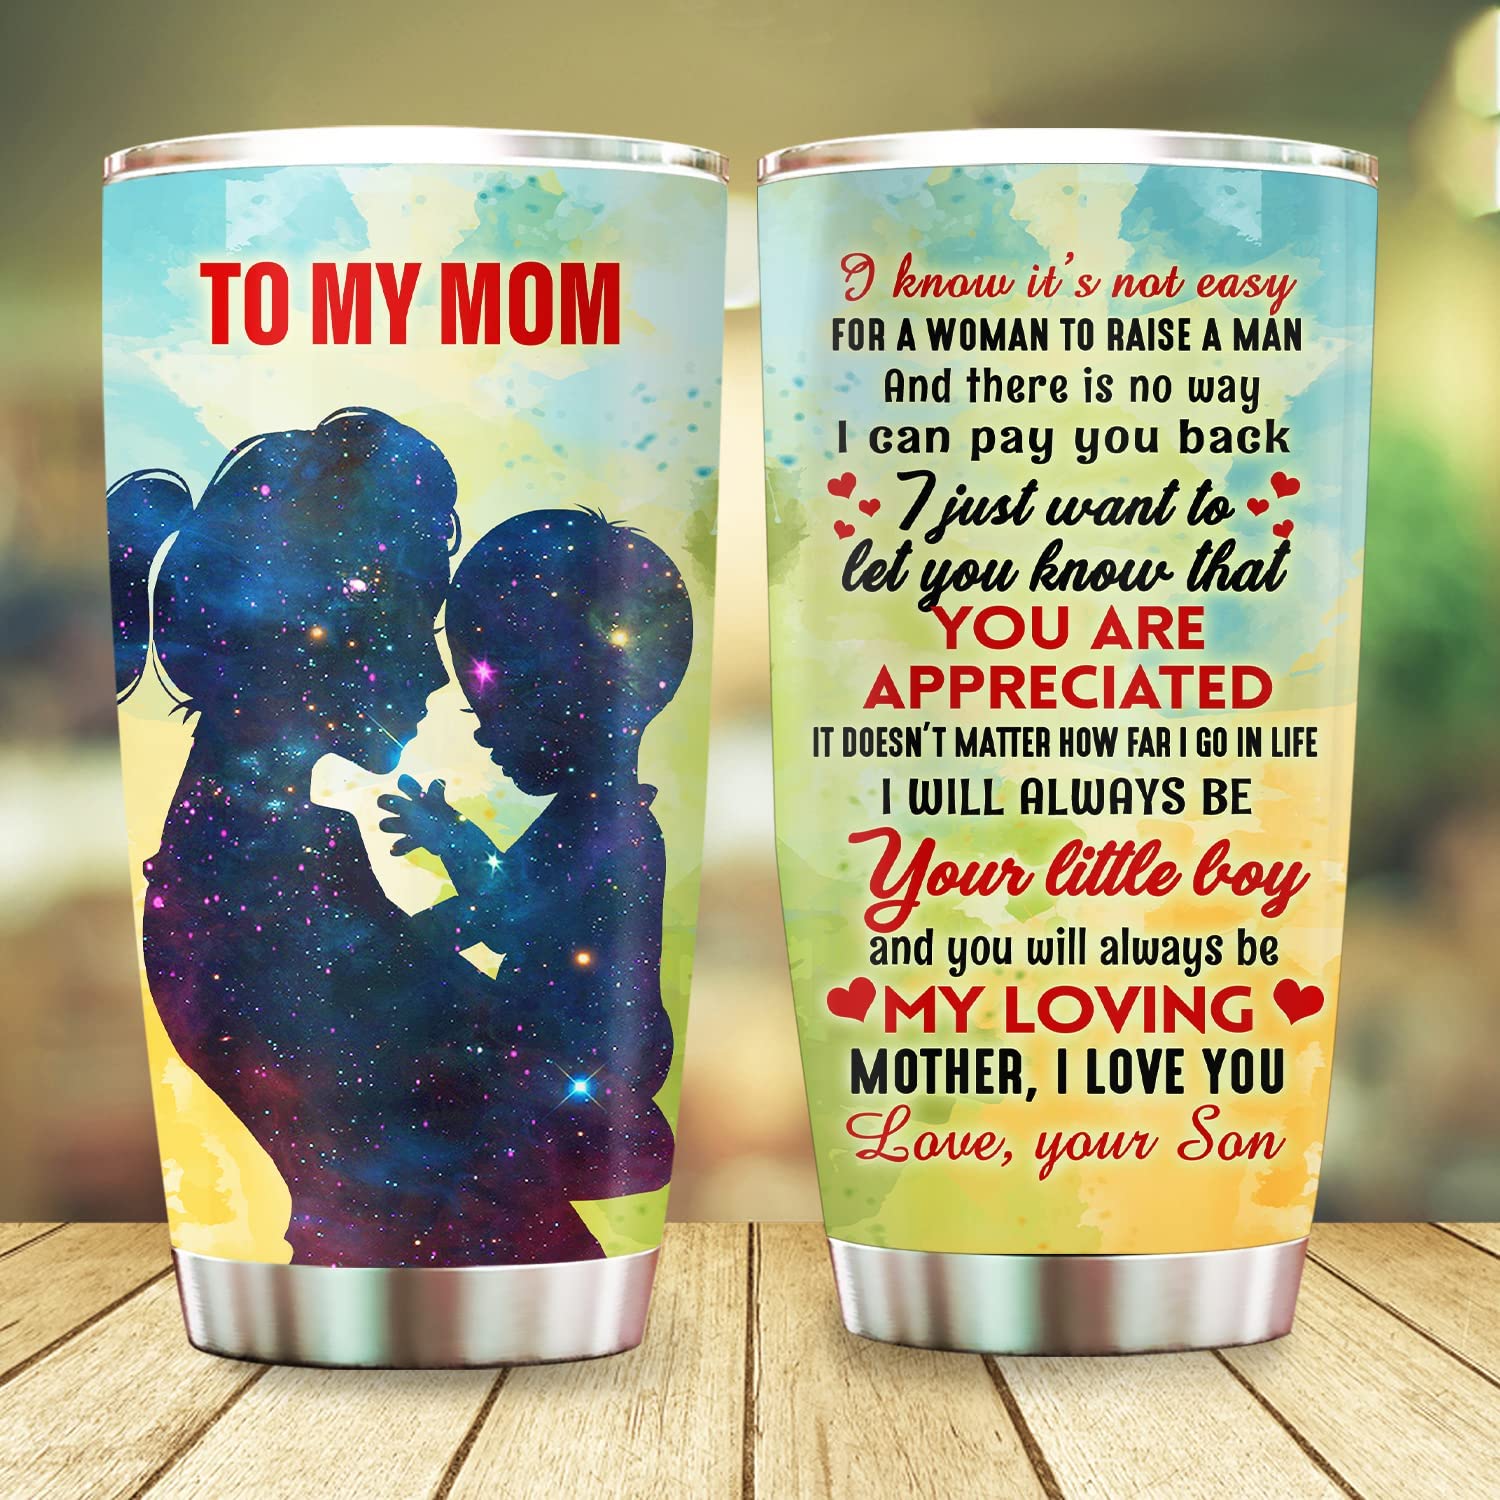 Mothers Day Gifts, To My Mom Tumbler, Mother Mama Mom Gifts on Christmas Birthday, Birthday Gifts for Mom from Son 20oz Stainless Steel Tumbler Cup with Lid Cold & Hot Water Coffee